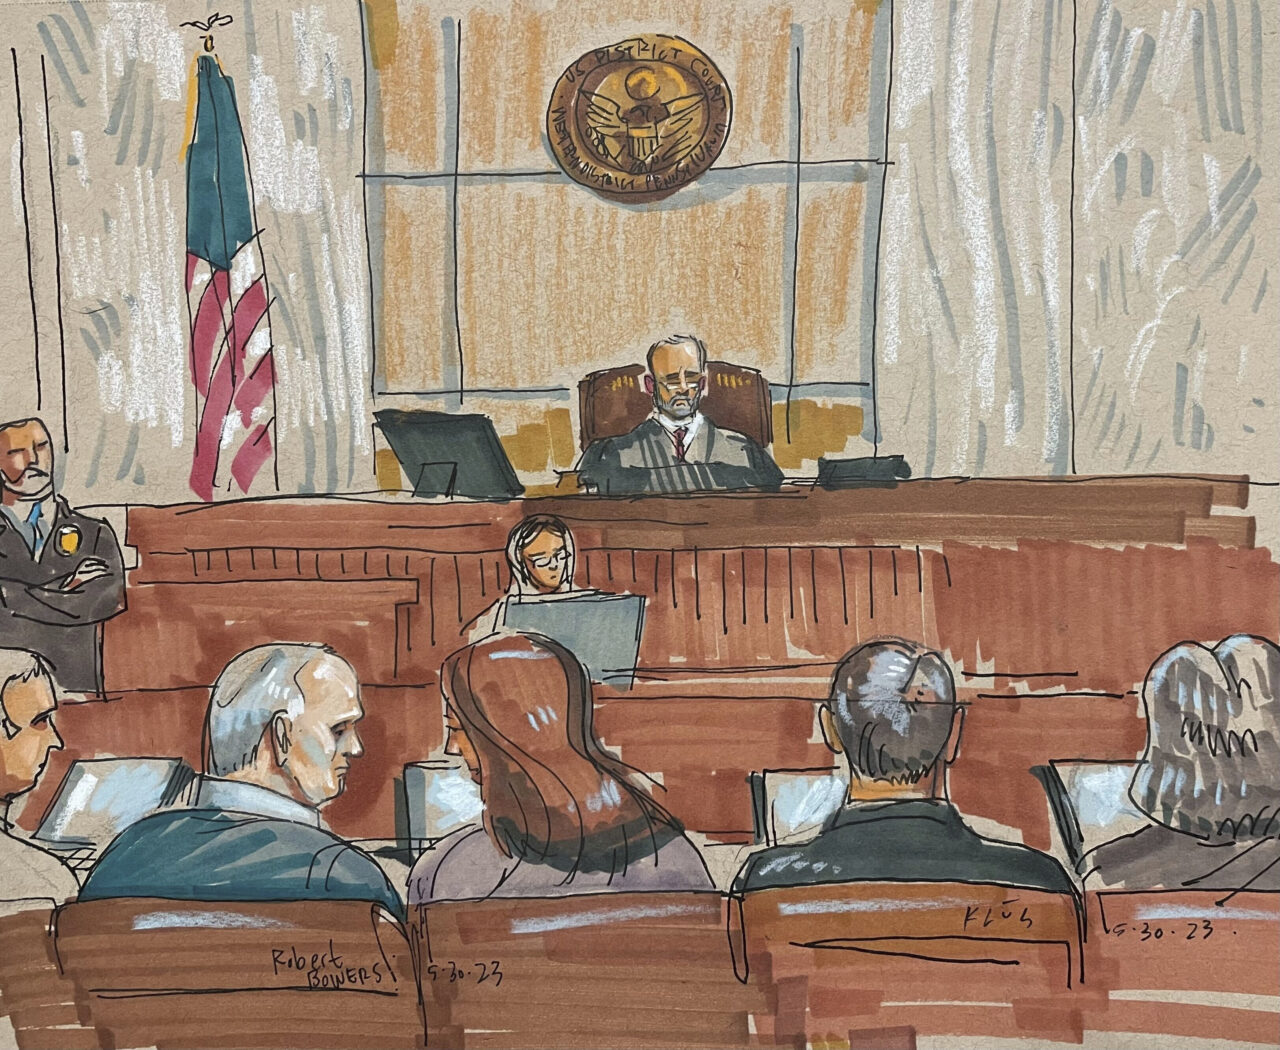 In this courtroom sketch, Robert Bowers, the suspect in the 2018 synagogue massacre, confers with his legal team on Tuesday, May 30, 2023, in Pittsburgh. Bowers could face the death penalty if convicted of some of the 63 counts he faces in the shootings, which claimed the lives of worshippers from three congregations who were sharing the building, Dor Hadash, New Light and Tree of Life.